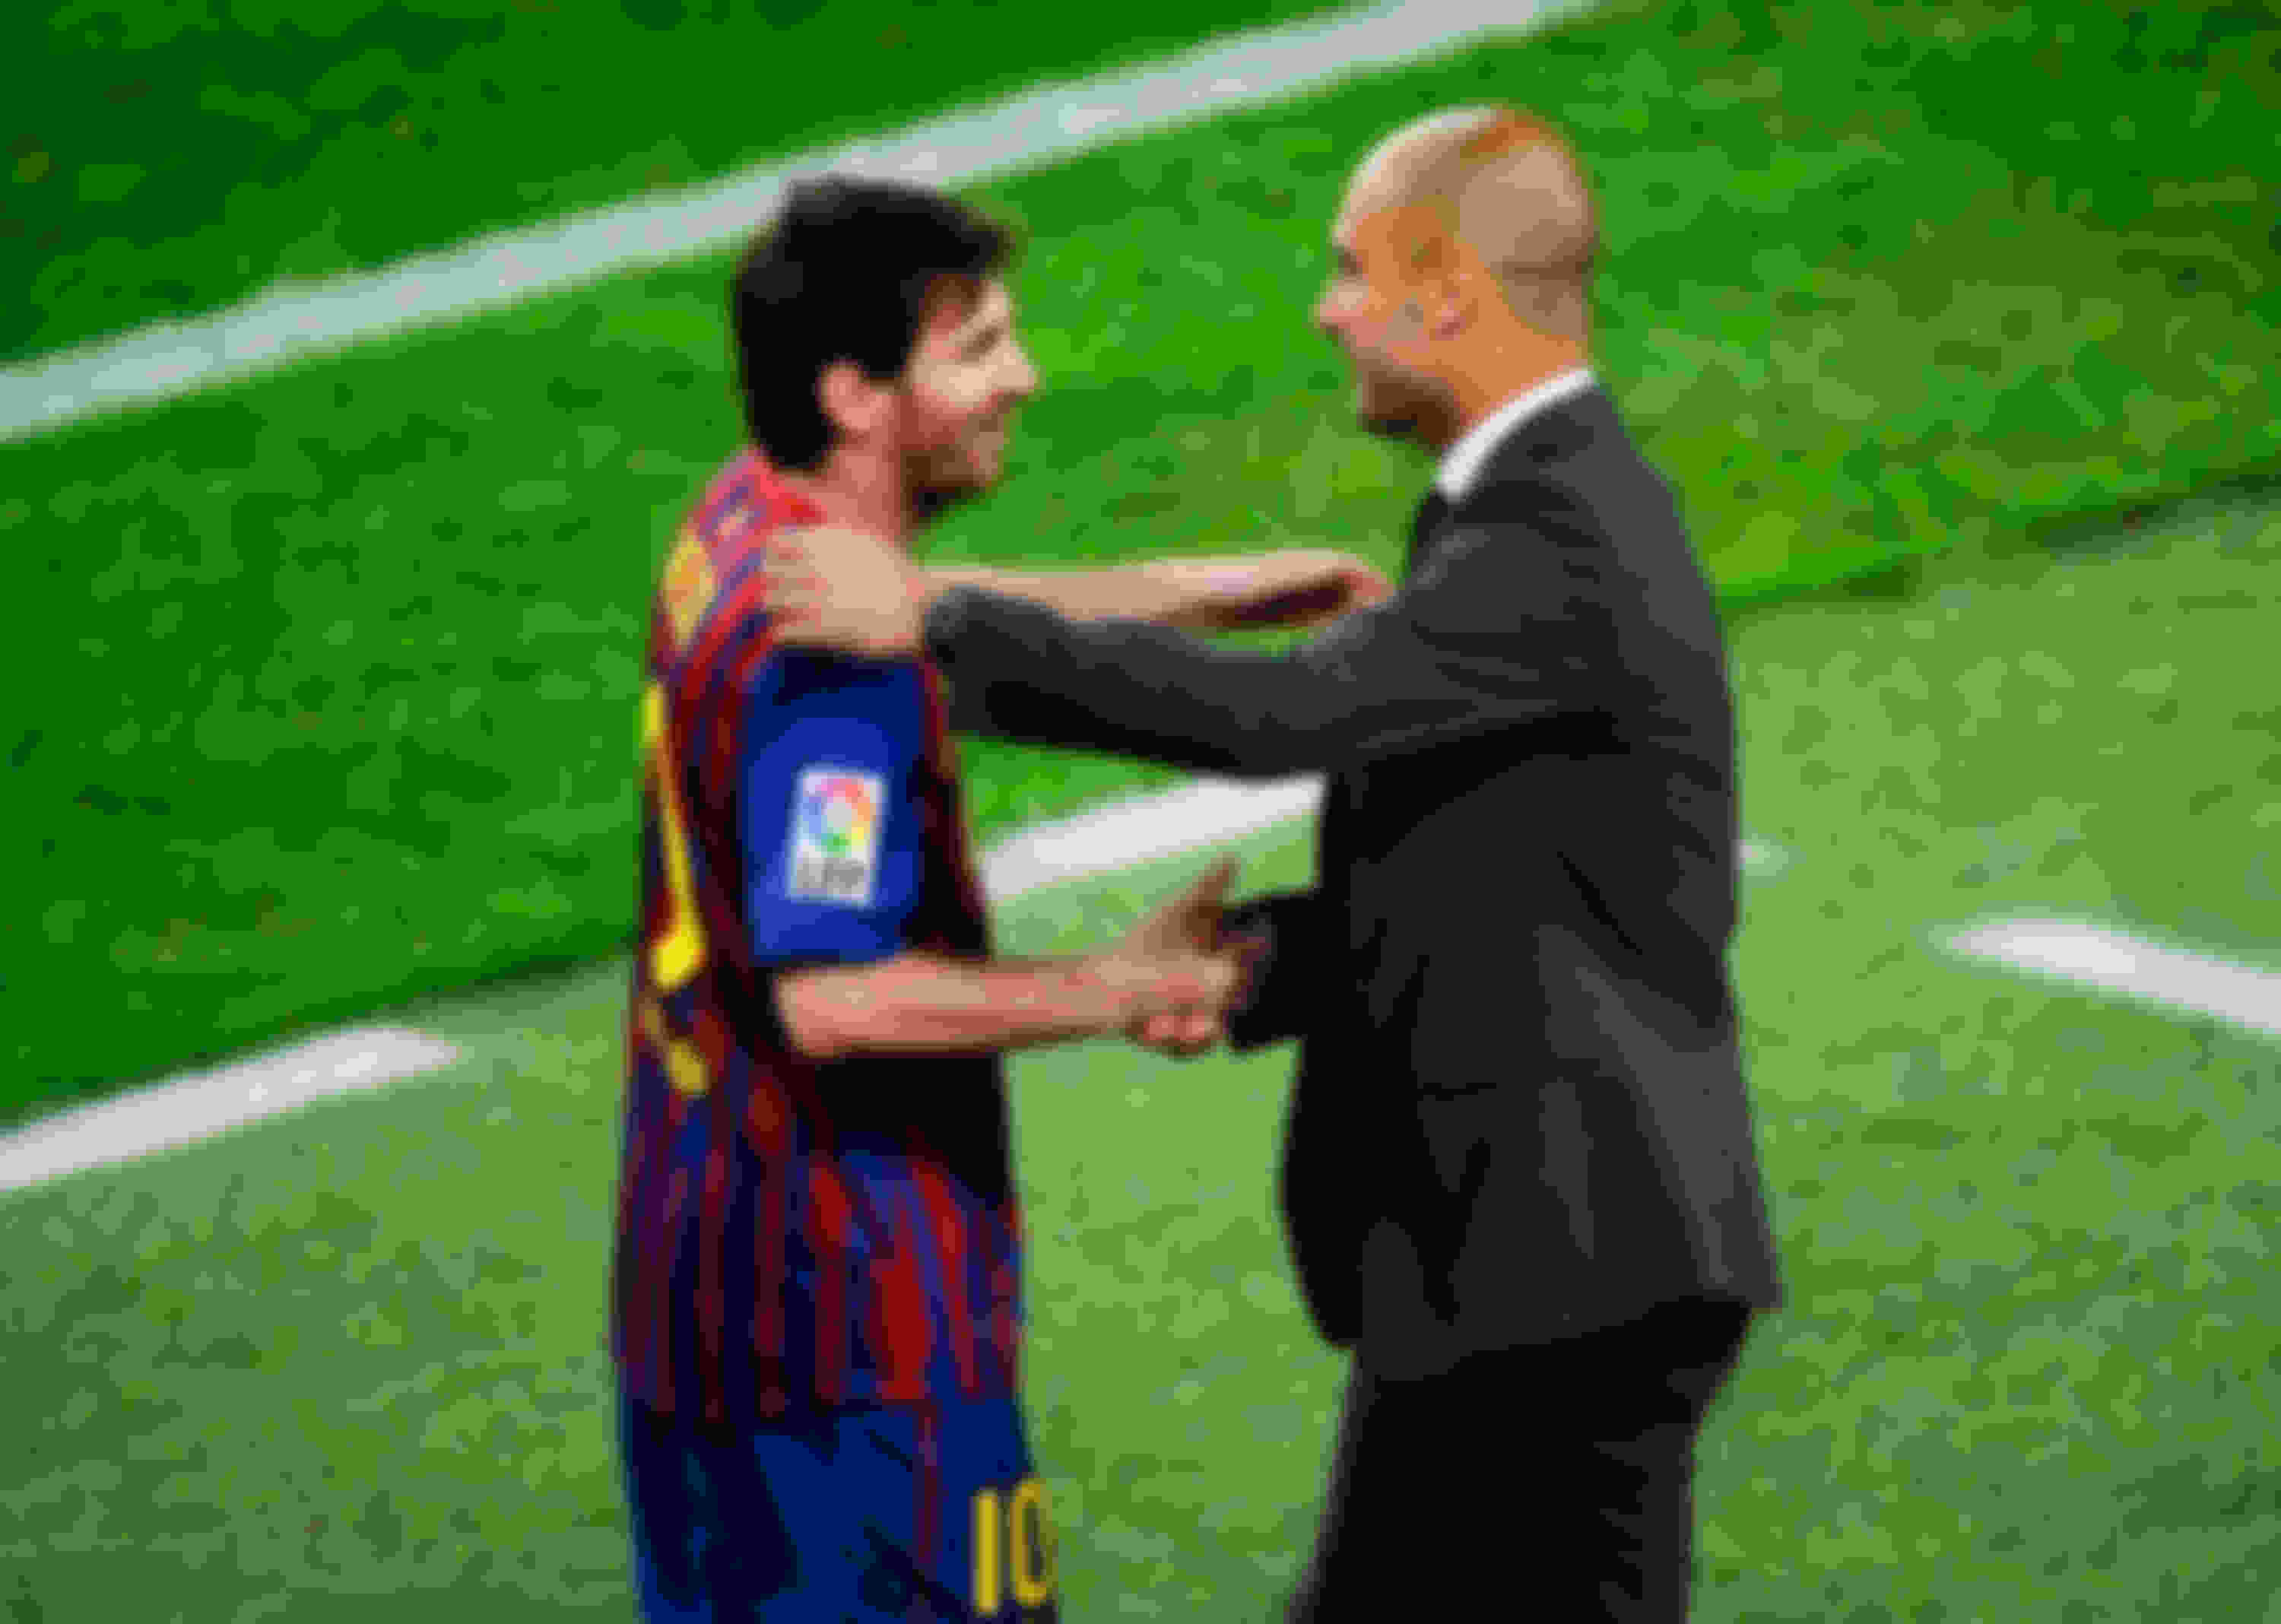 Pep Guardiola had a big influence in Lionel Messi's career